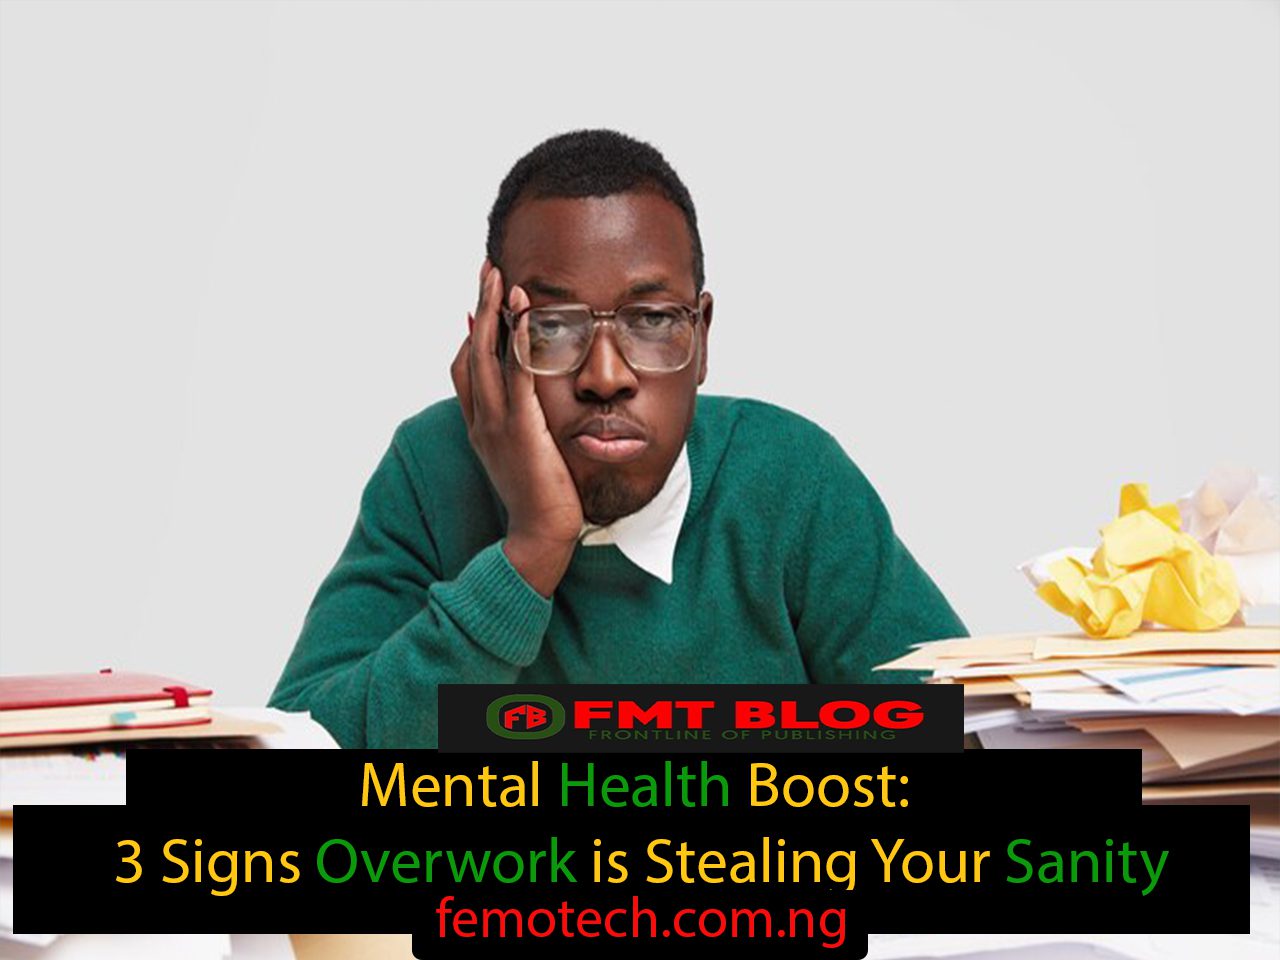 Mental Health Boost: 3 Signs Overwork is Stealing Your Sanity